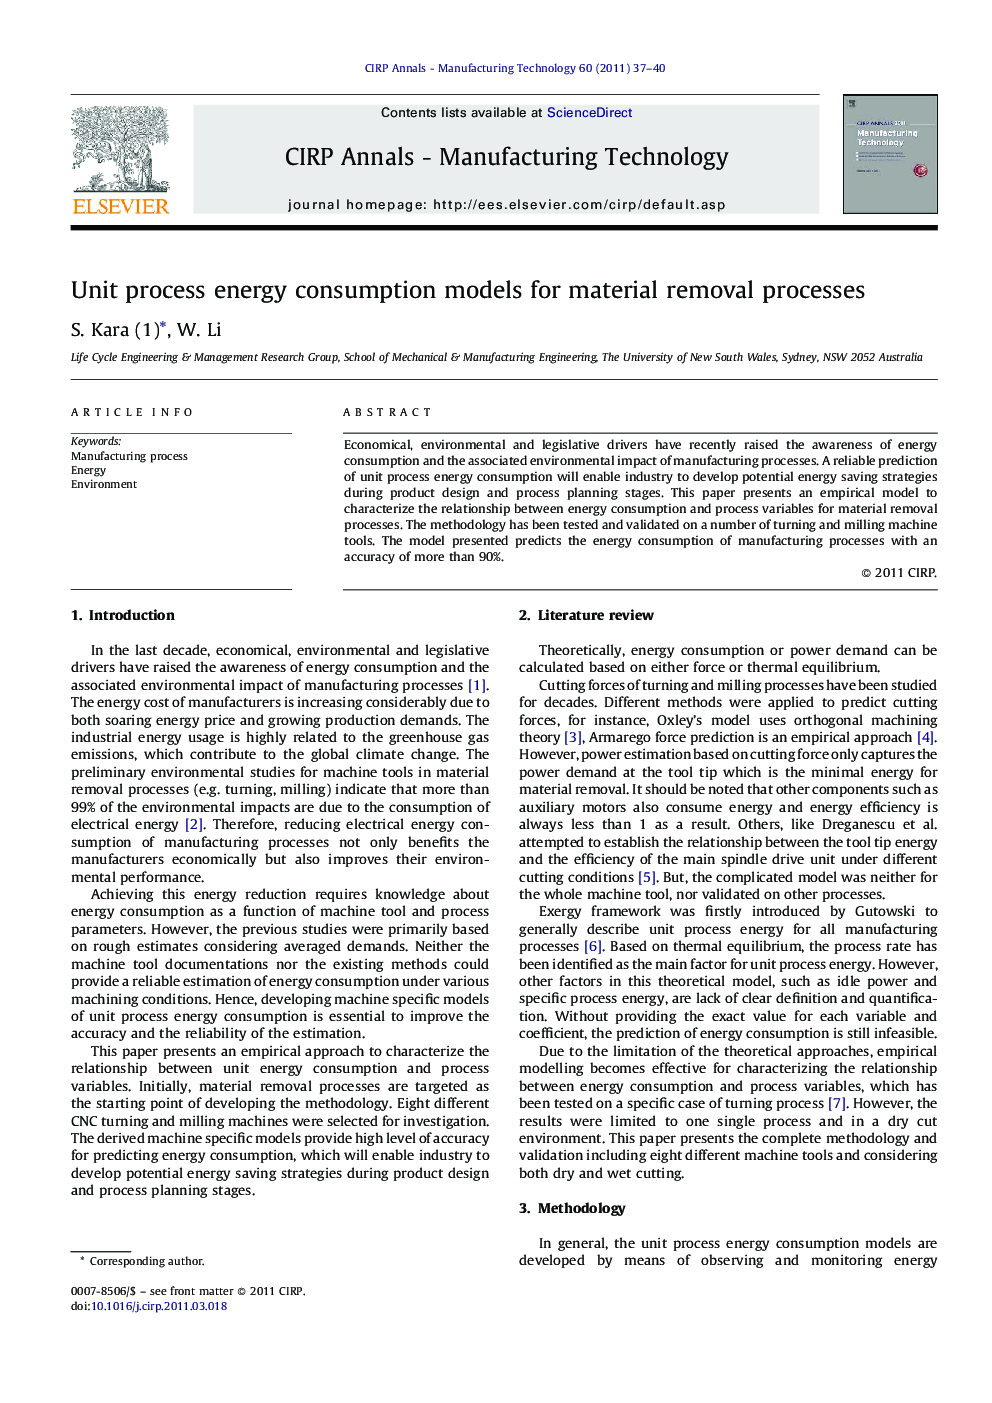 Unit process energy consumption models for material removal processes